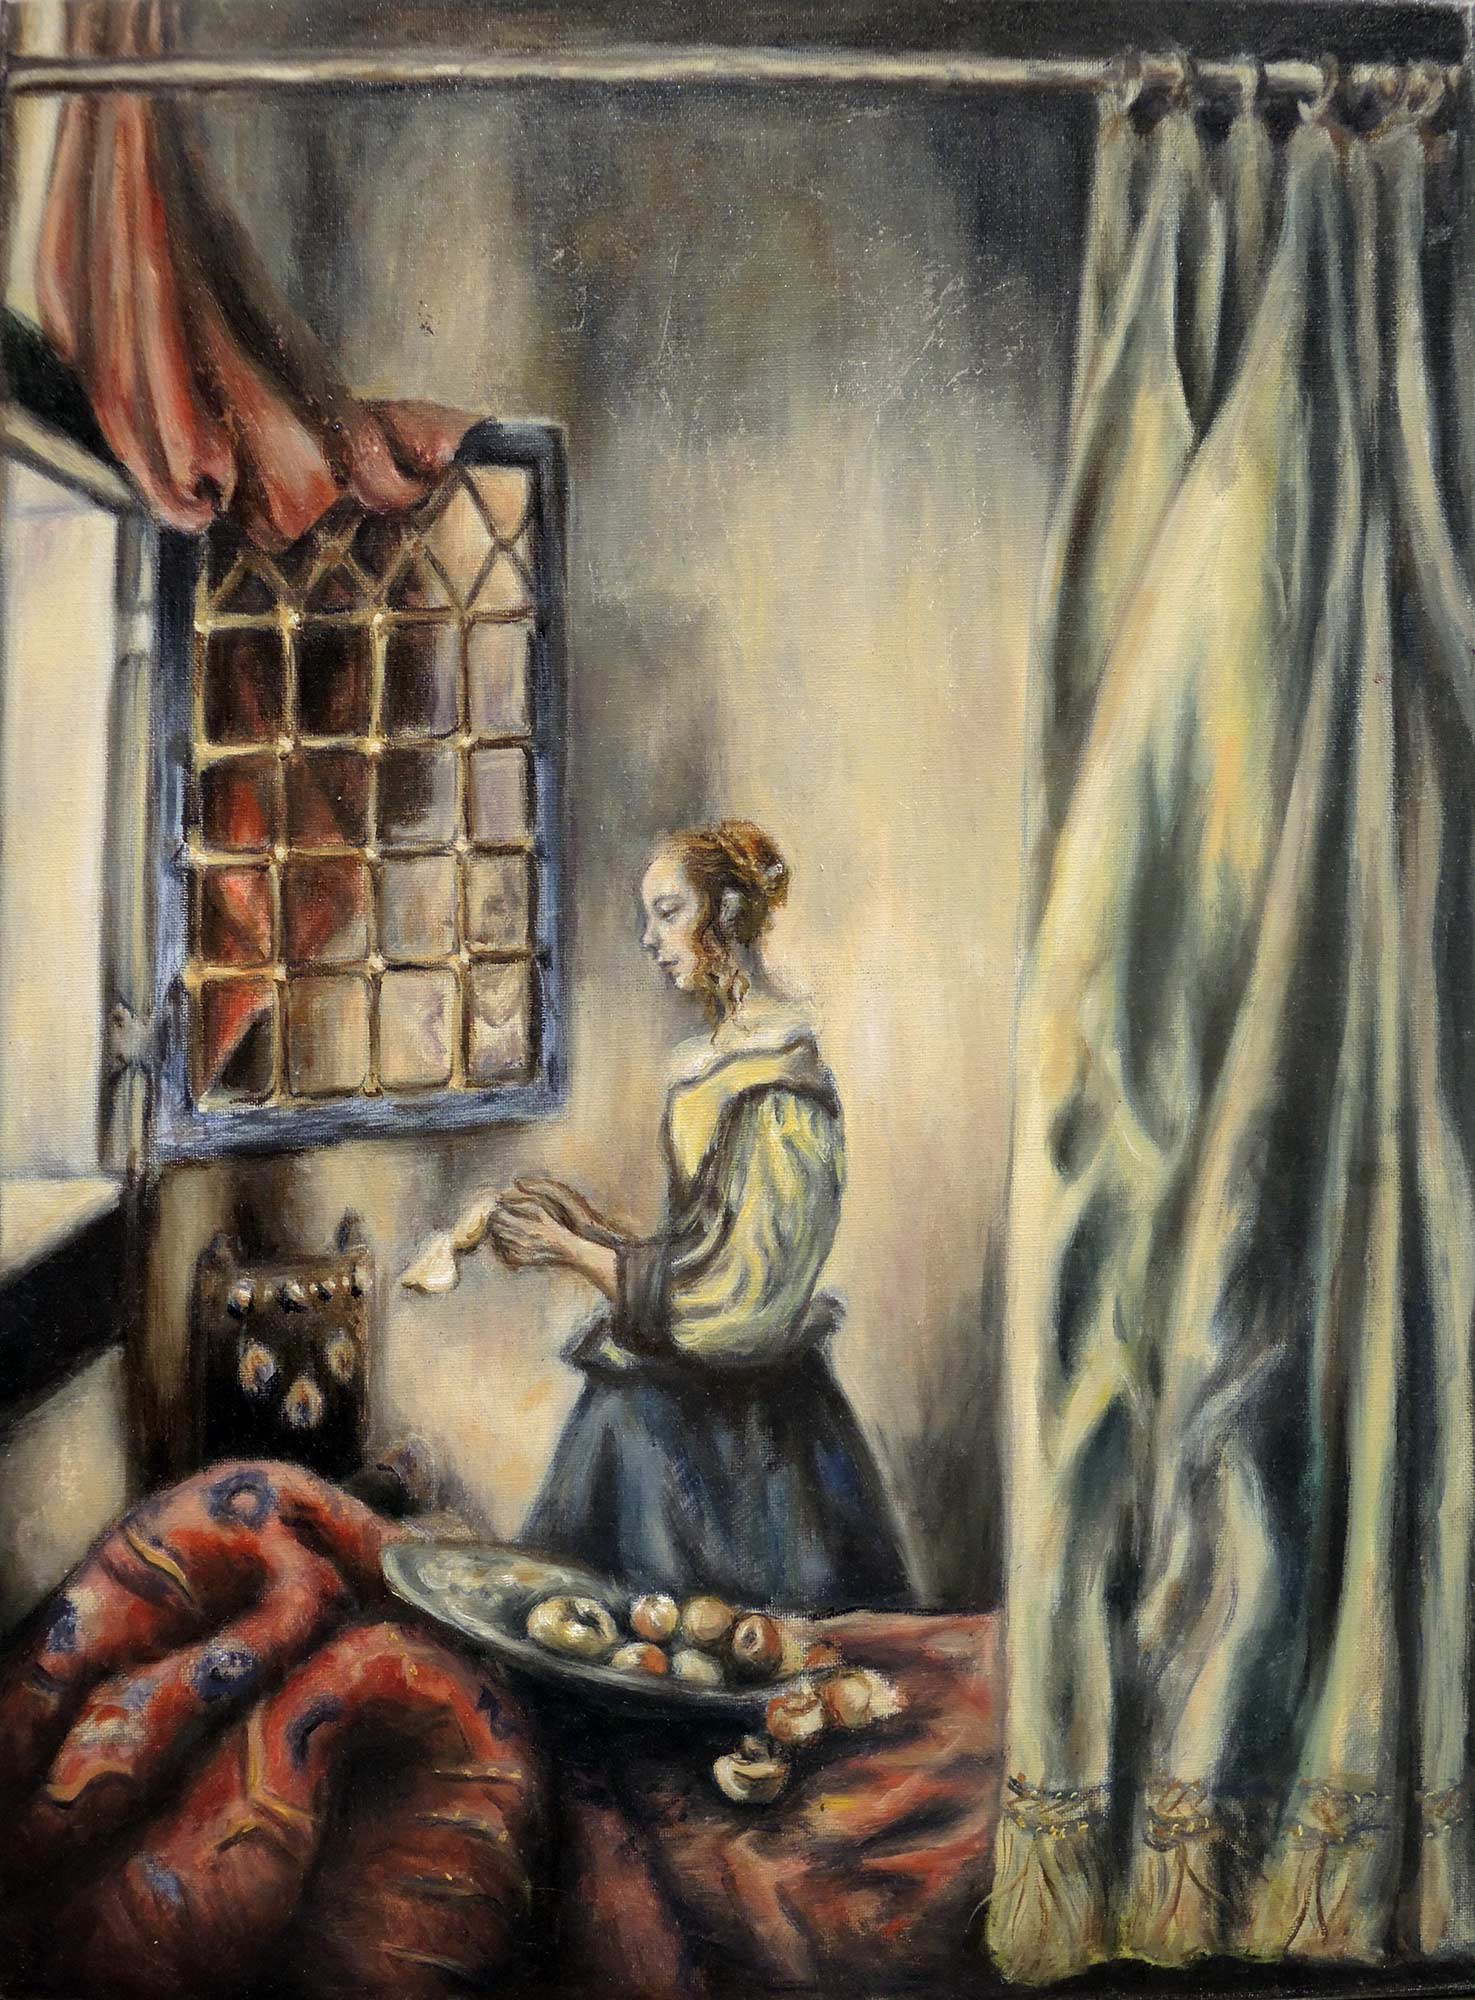 A painting of a woman at a window